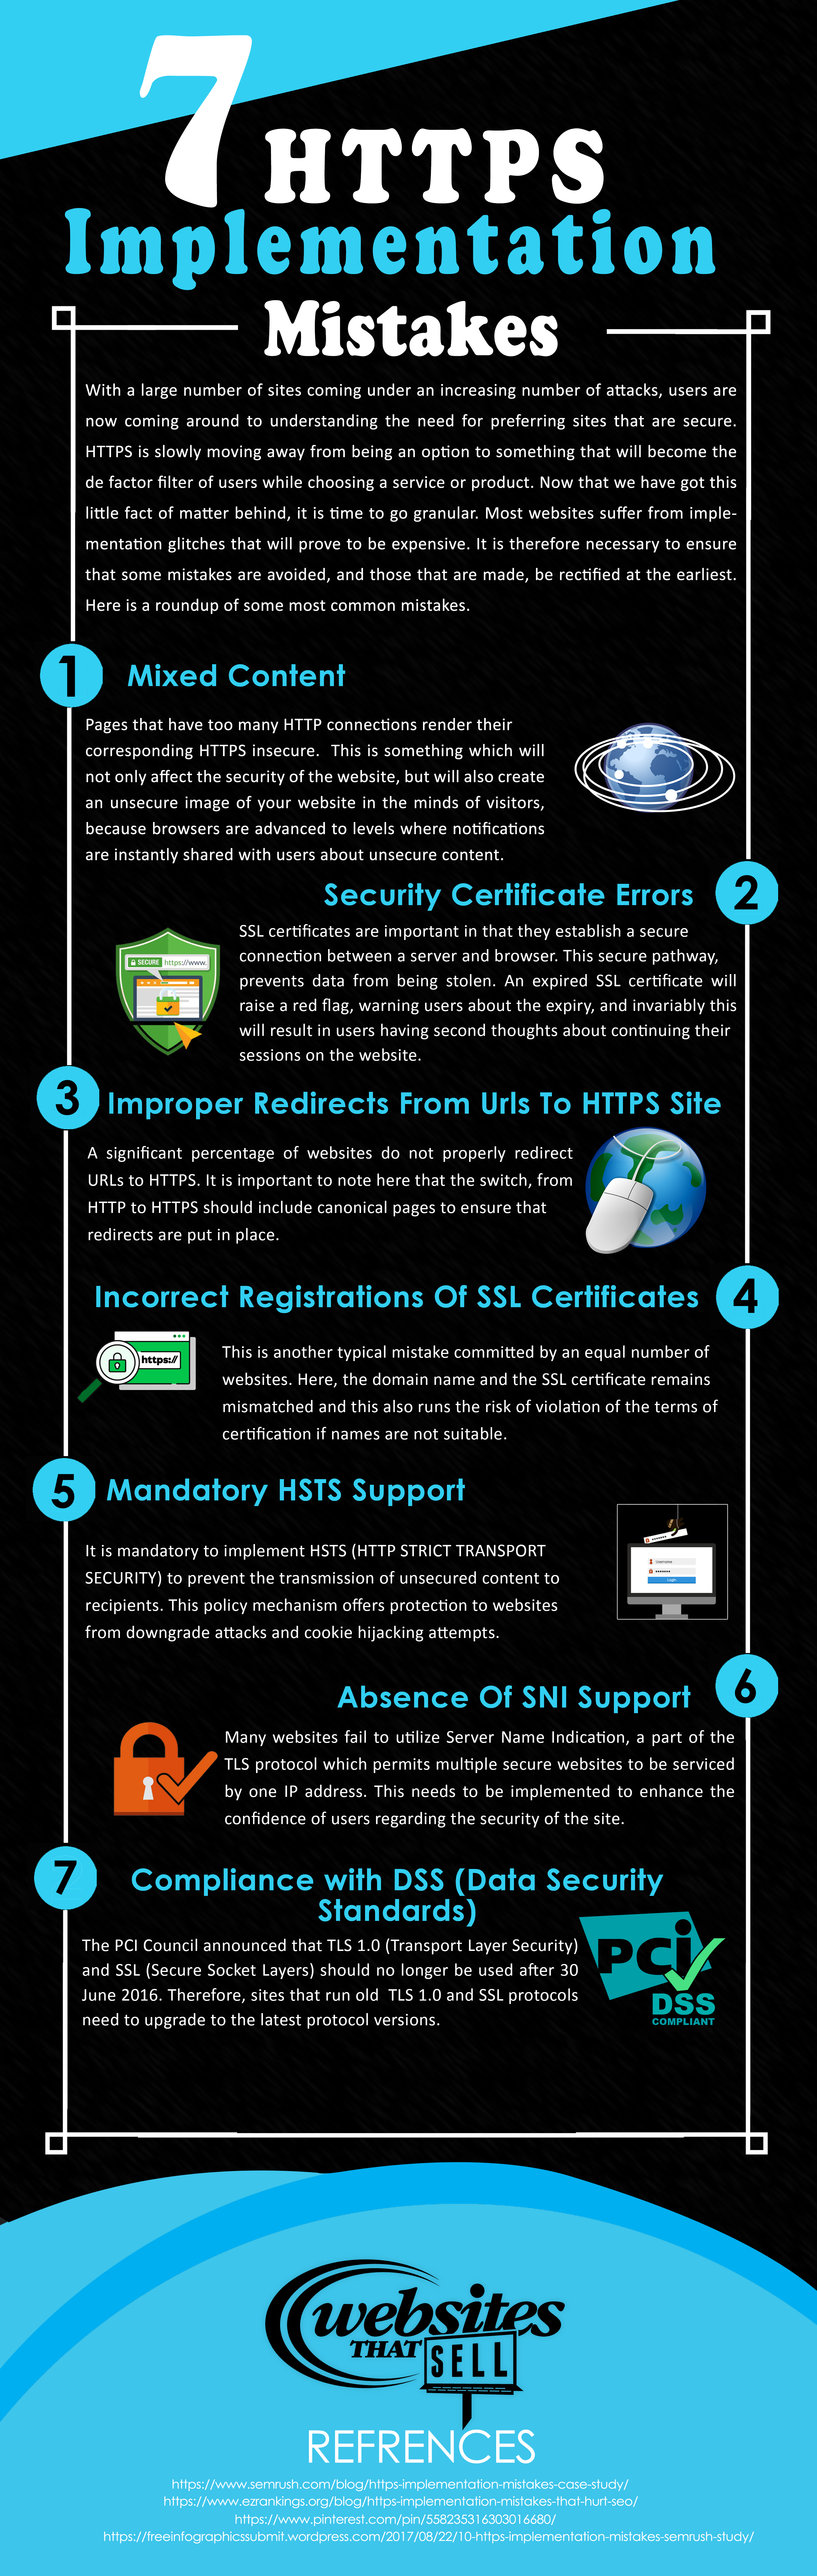 7 HTTPS Implementation Mistakes